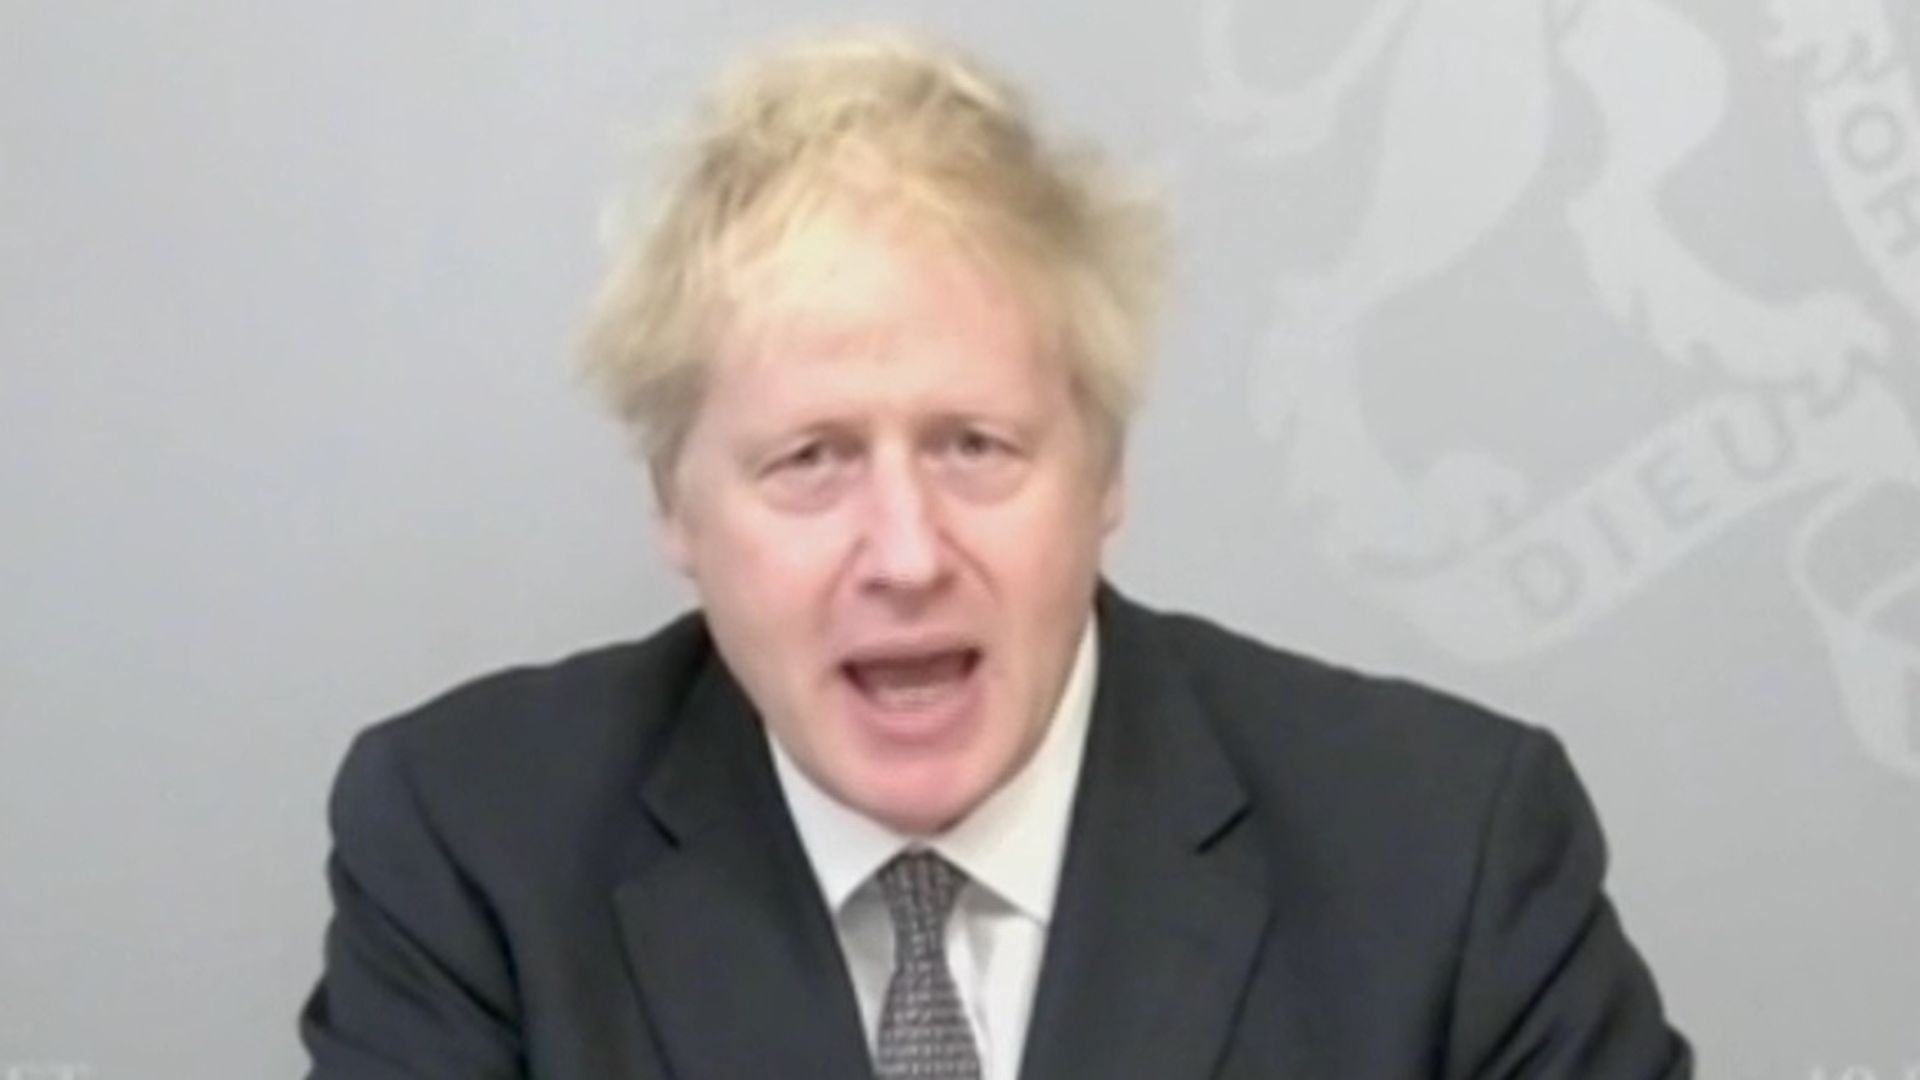 Boris Johnson appearing virtually before prime minister's questions in the House of Commons - Credit: Parliament